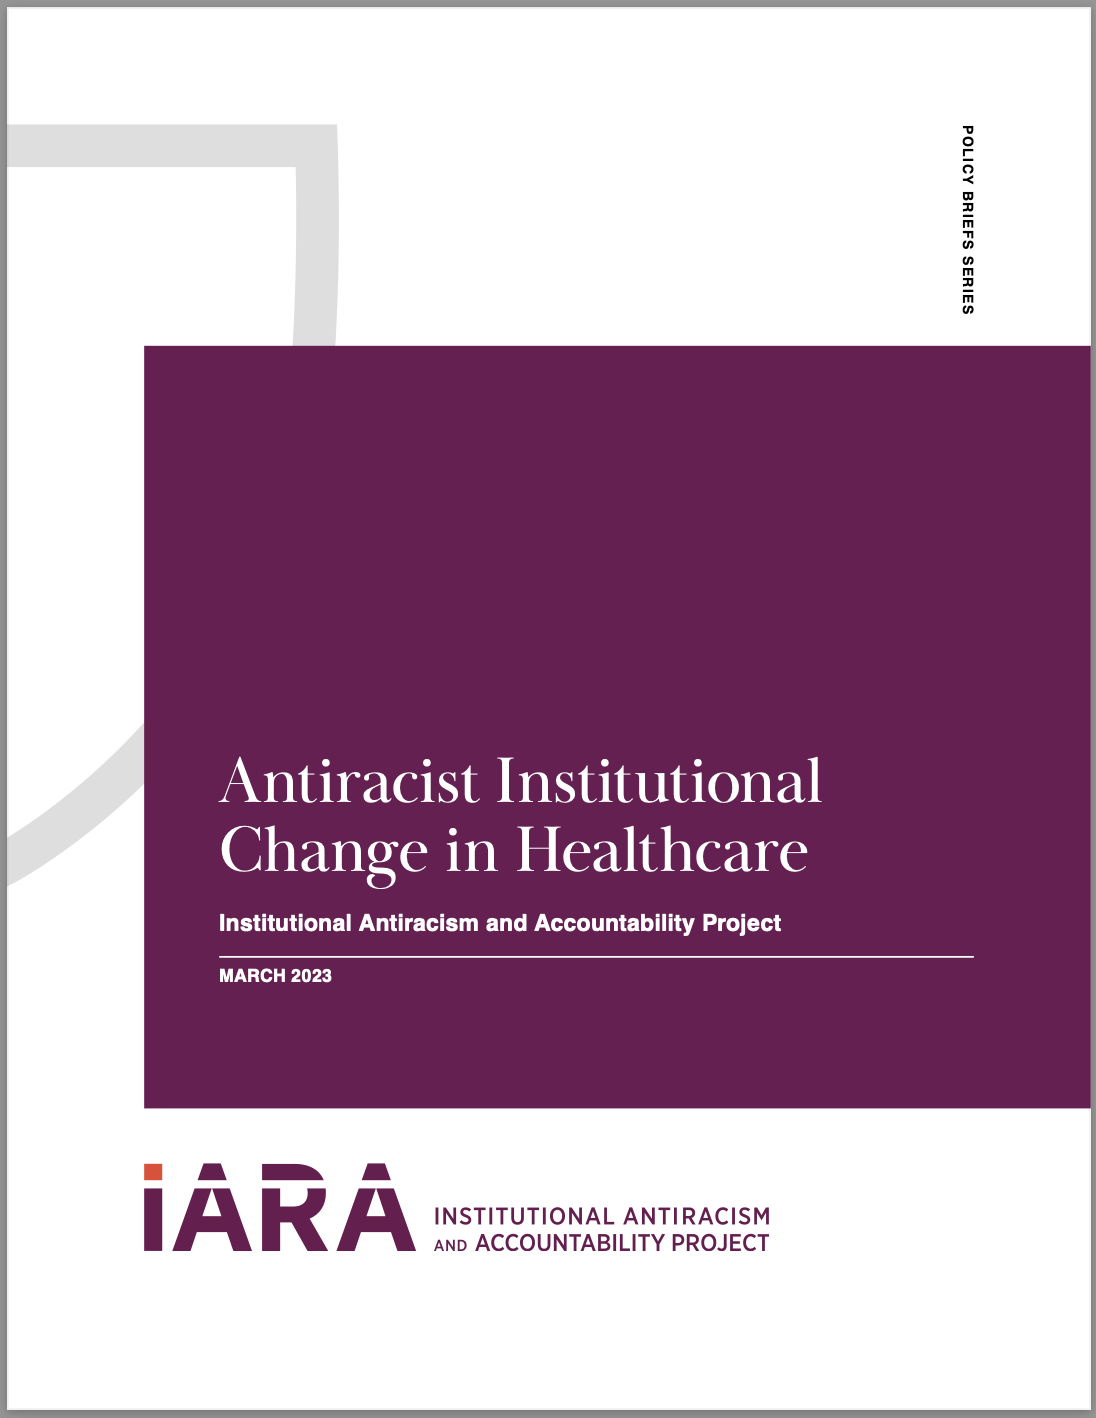 Antiracist Institutional Change in Healthcare